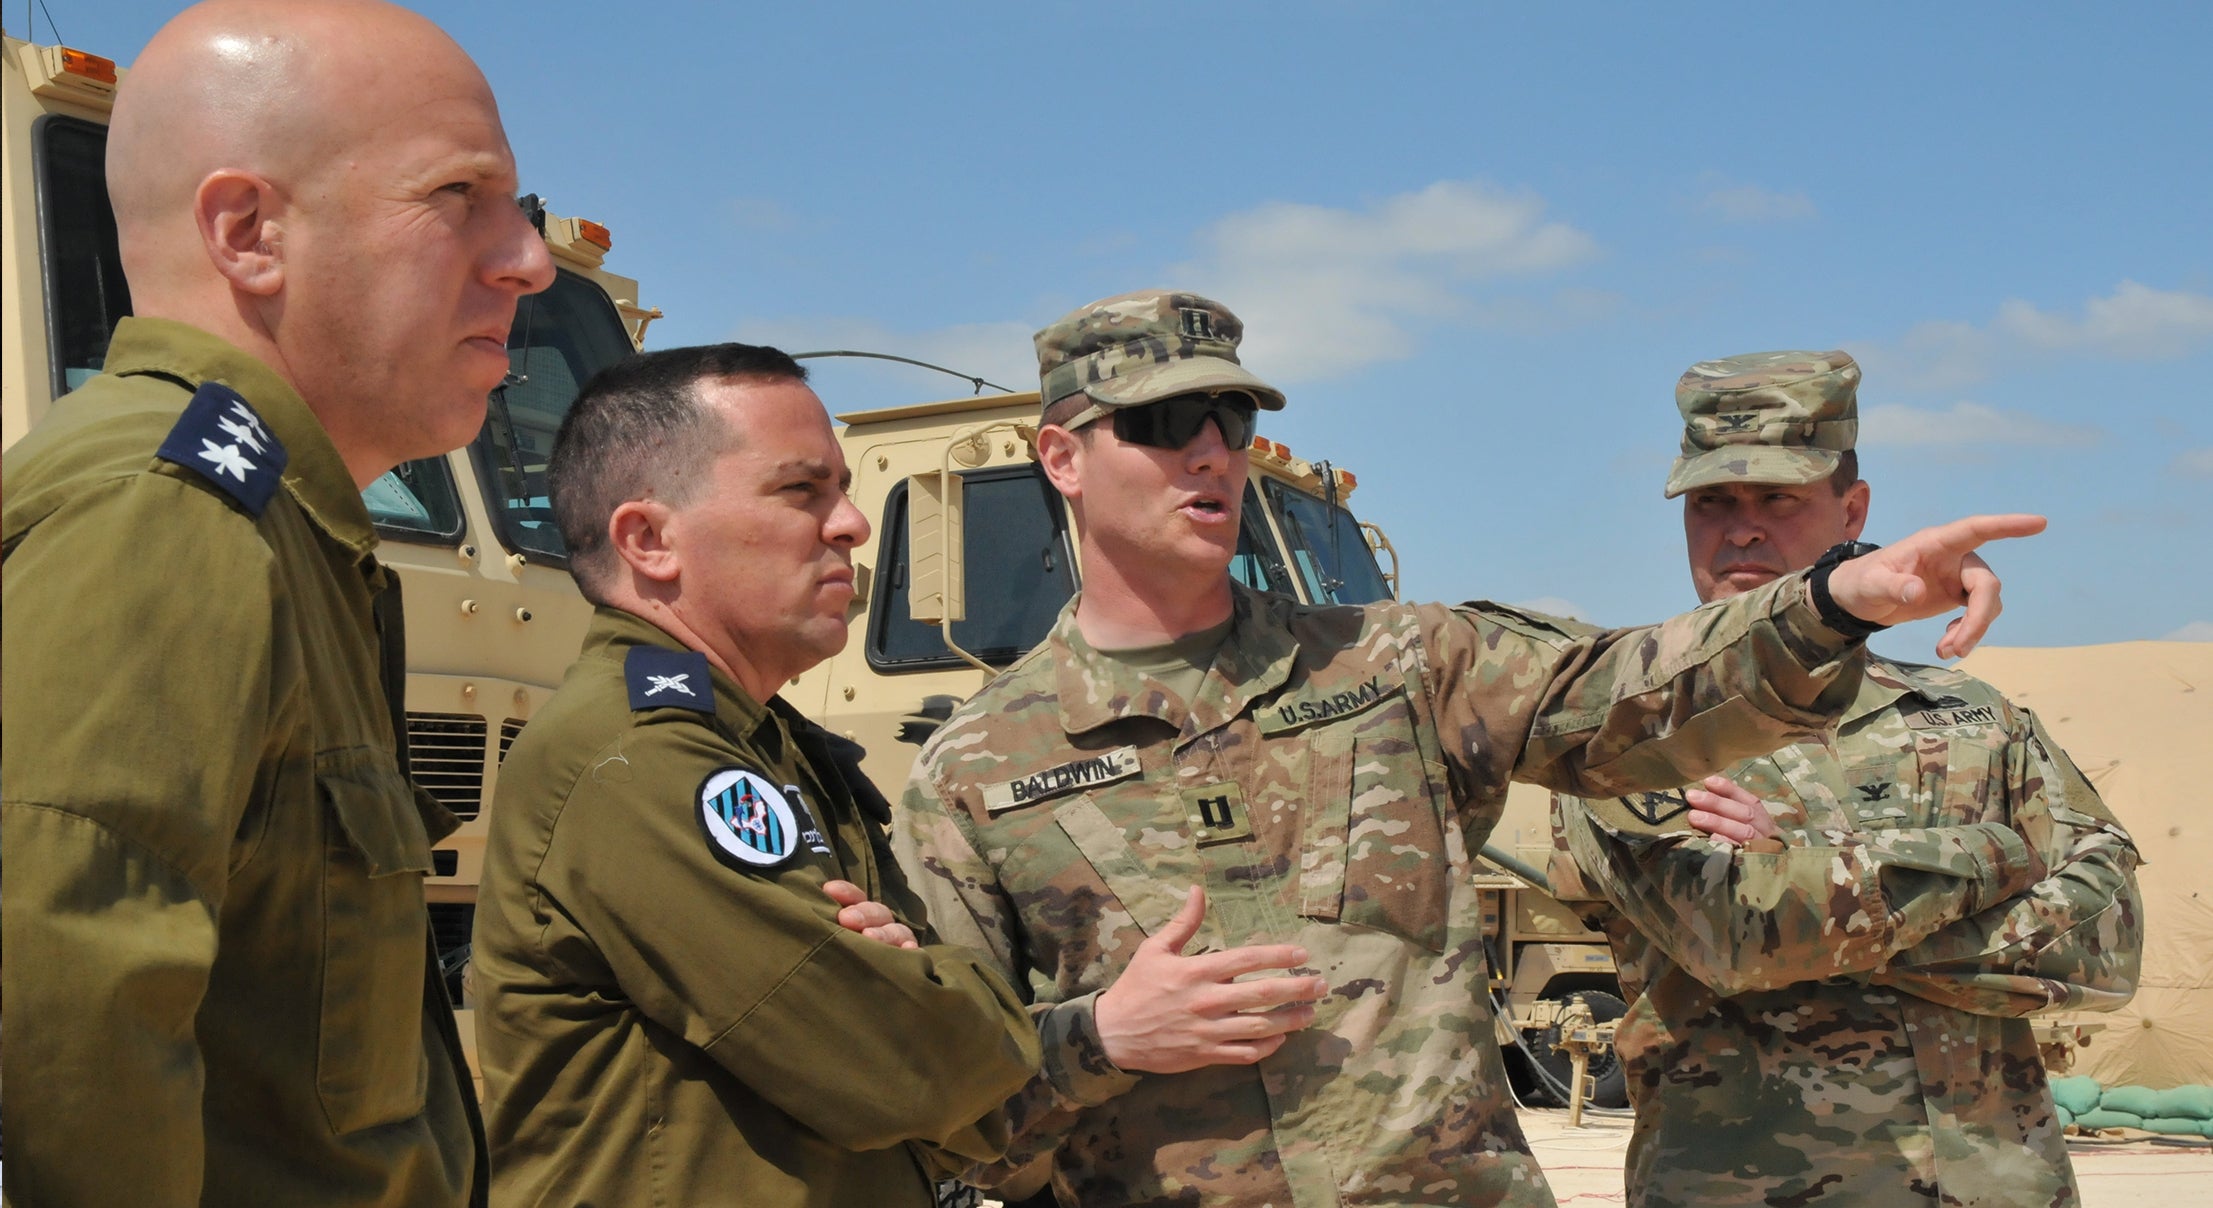 Two IDF Air Force members and two U.S. Army Soldiers standing in front of equipment